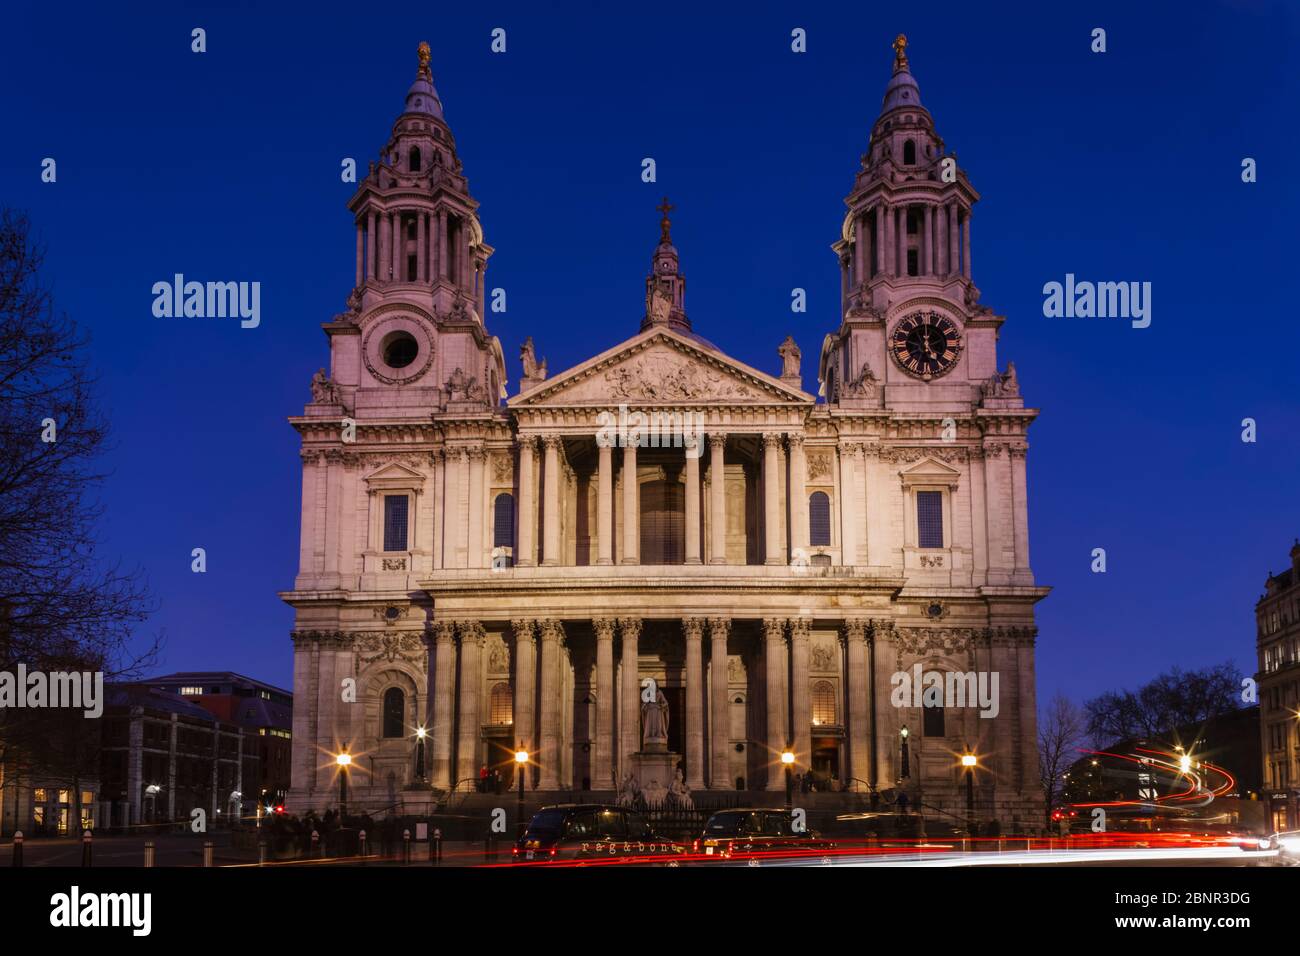 England, London, City of London, St Paul's Cathedral, Night View of The West Facade and  Entrance Stock Photo